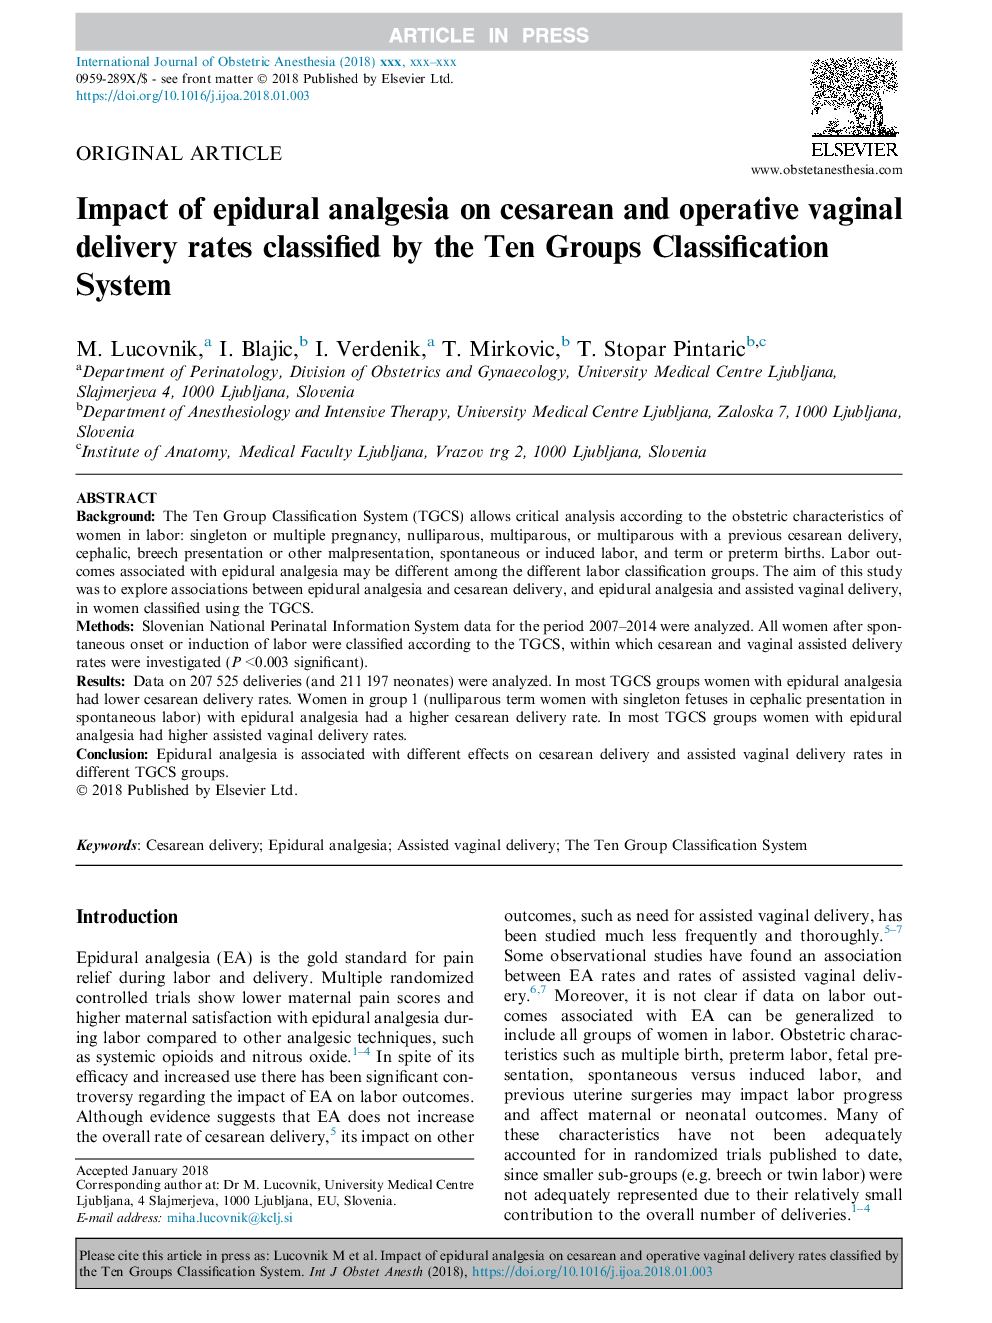 Impact of epidural analgesia on cesarean and operative vaginal delivery rates classified by the Ten Groups Classification System